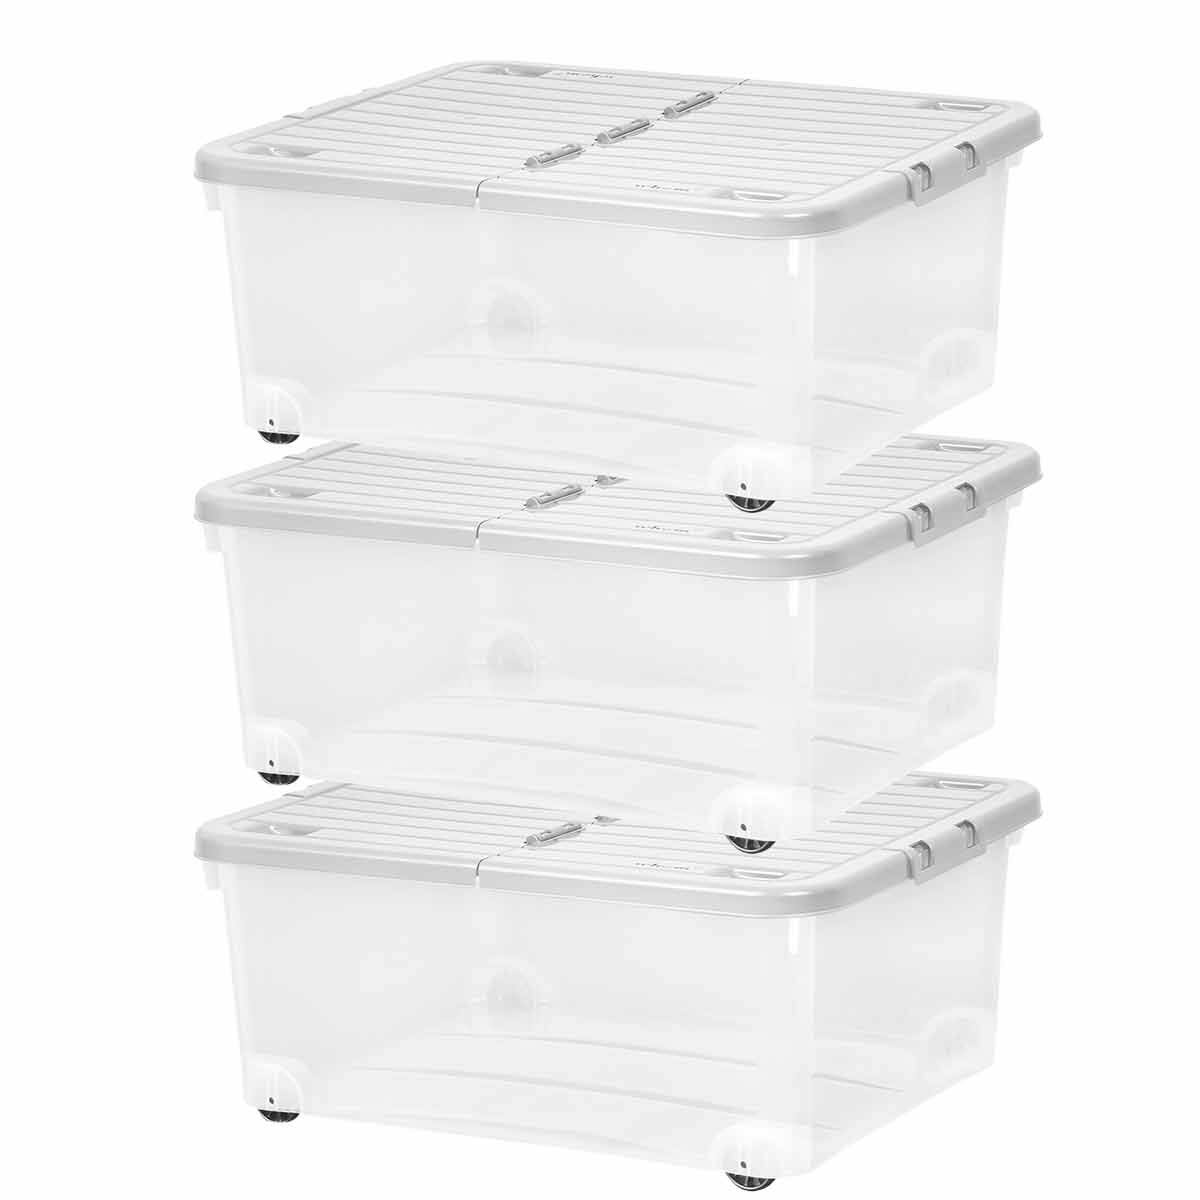 Wham 30 Litre Box with Wheels and Folding Lid Pack of 3